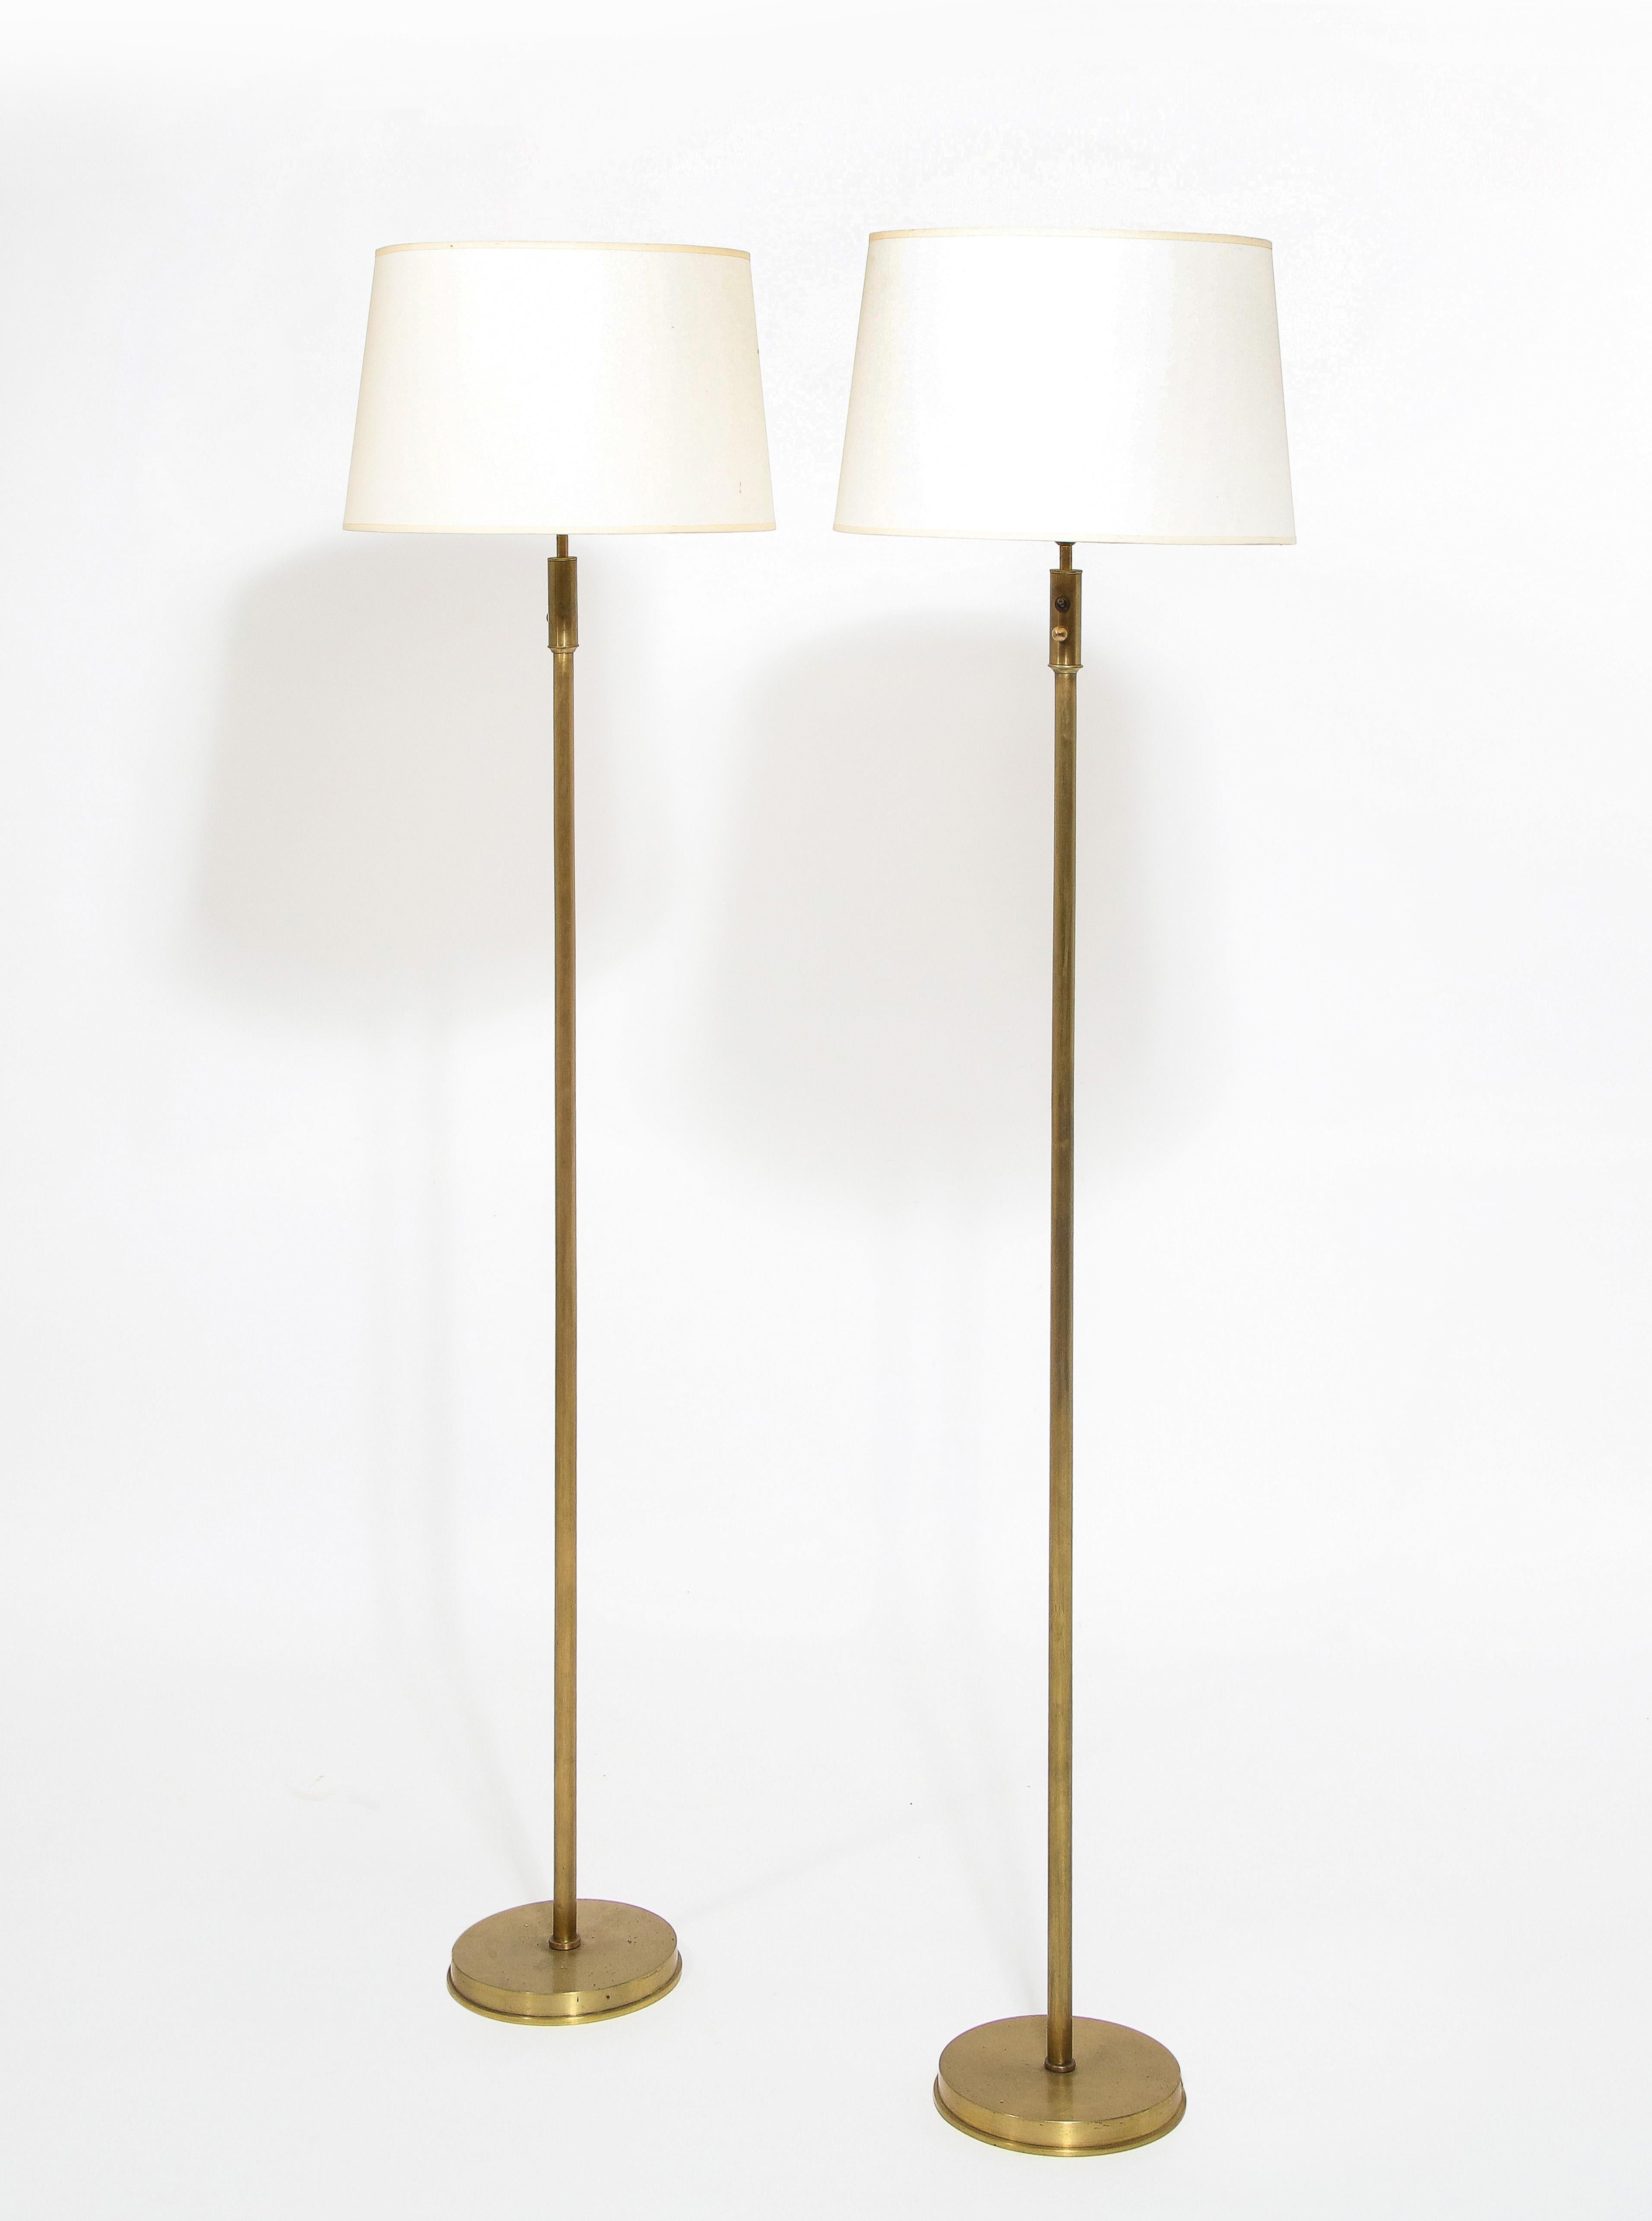 Elegant pair of brushed brass floor lamps on circular bases. Shades are for photographic purposes.